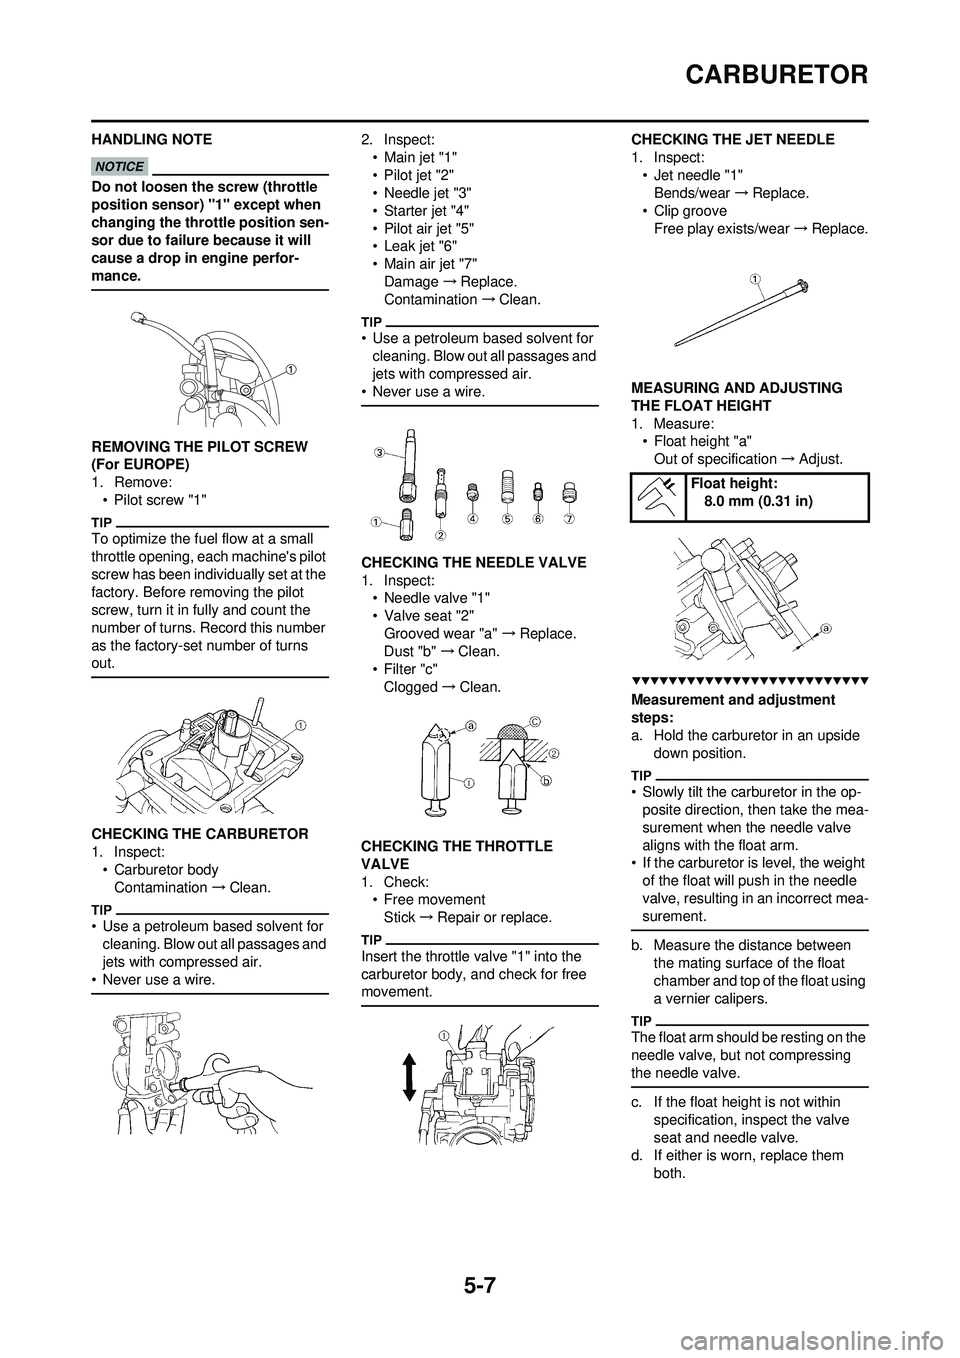 YAMAHA WR 250F 2009  Owners Manual 5-7
CARBURETOR
HANDLING NOTE
Do not loosen the screw (throttle 
position sensor) "1" except when 
changing the throttle position sen-
sor due to failure because it will 
cause a drop in engine perfor-